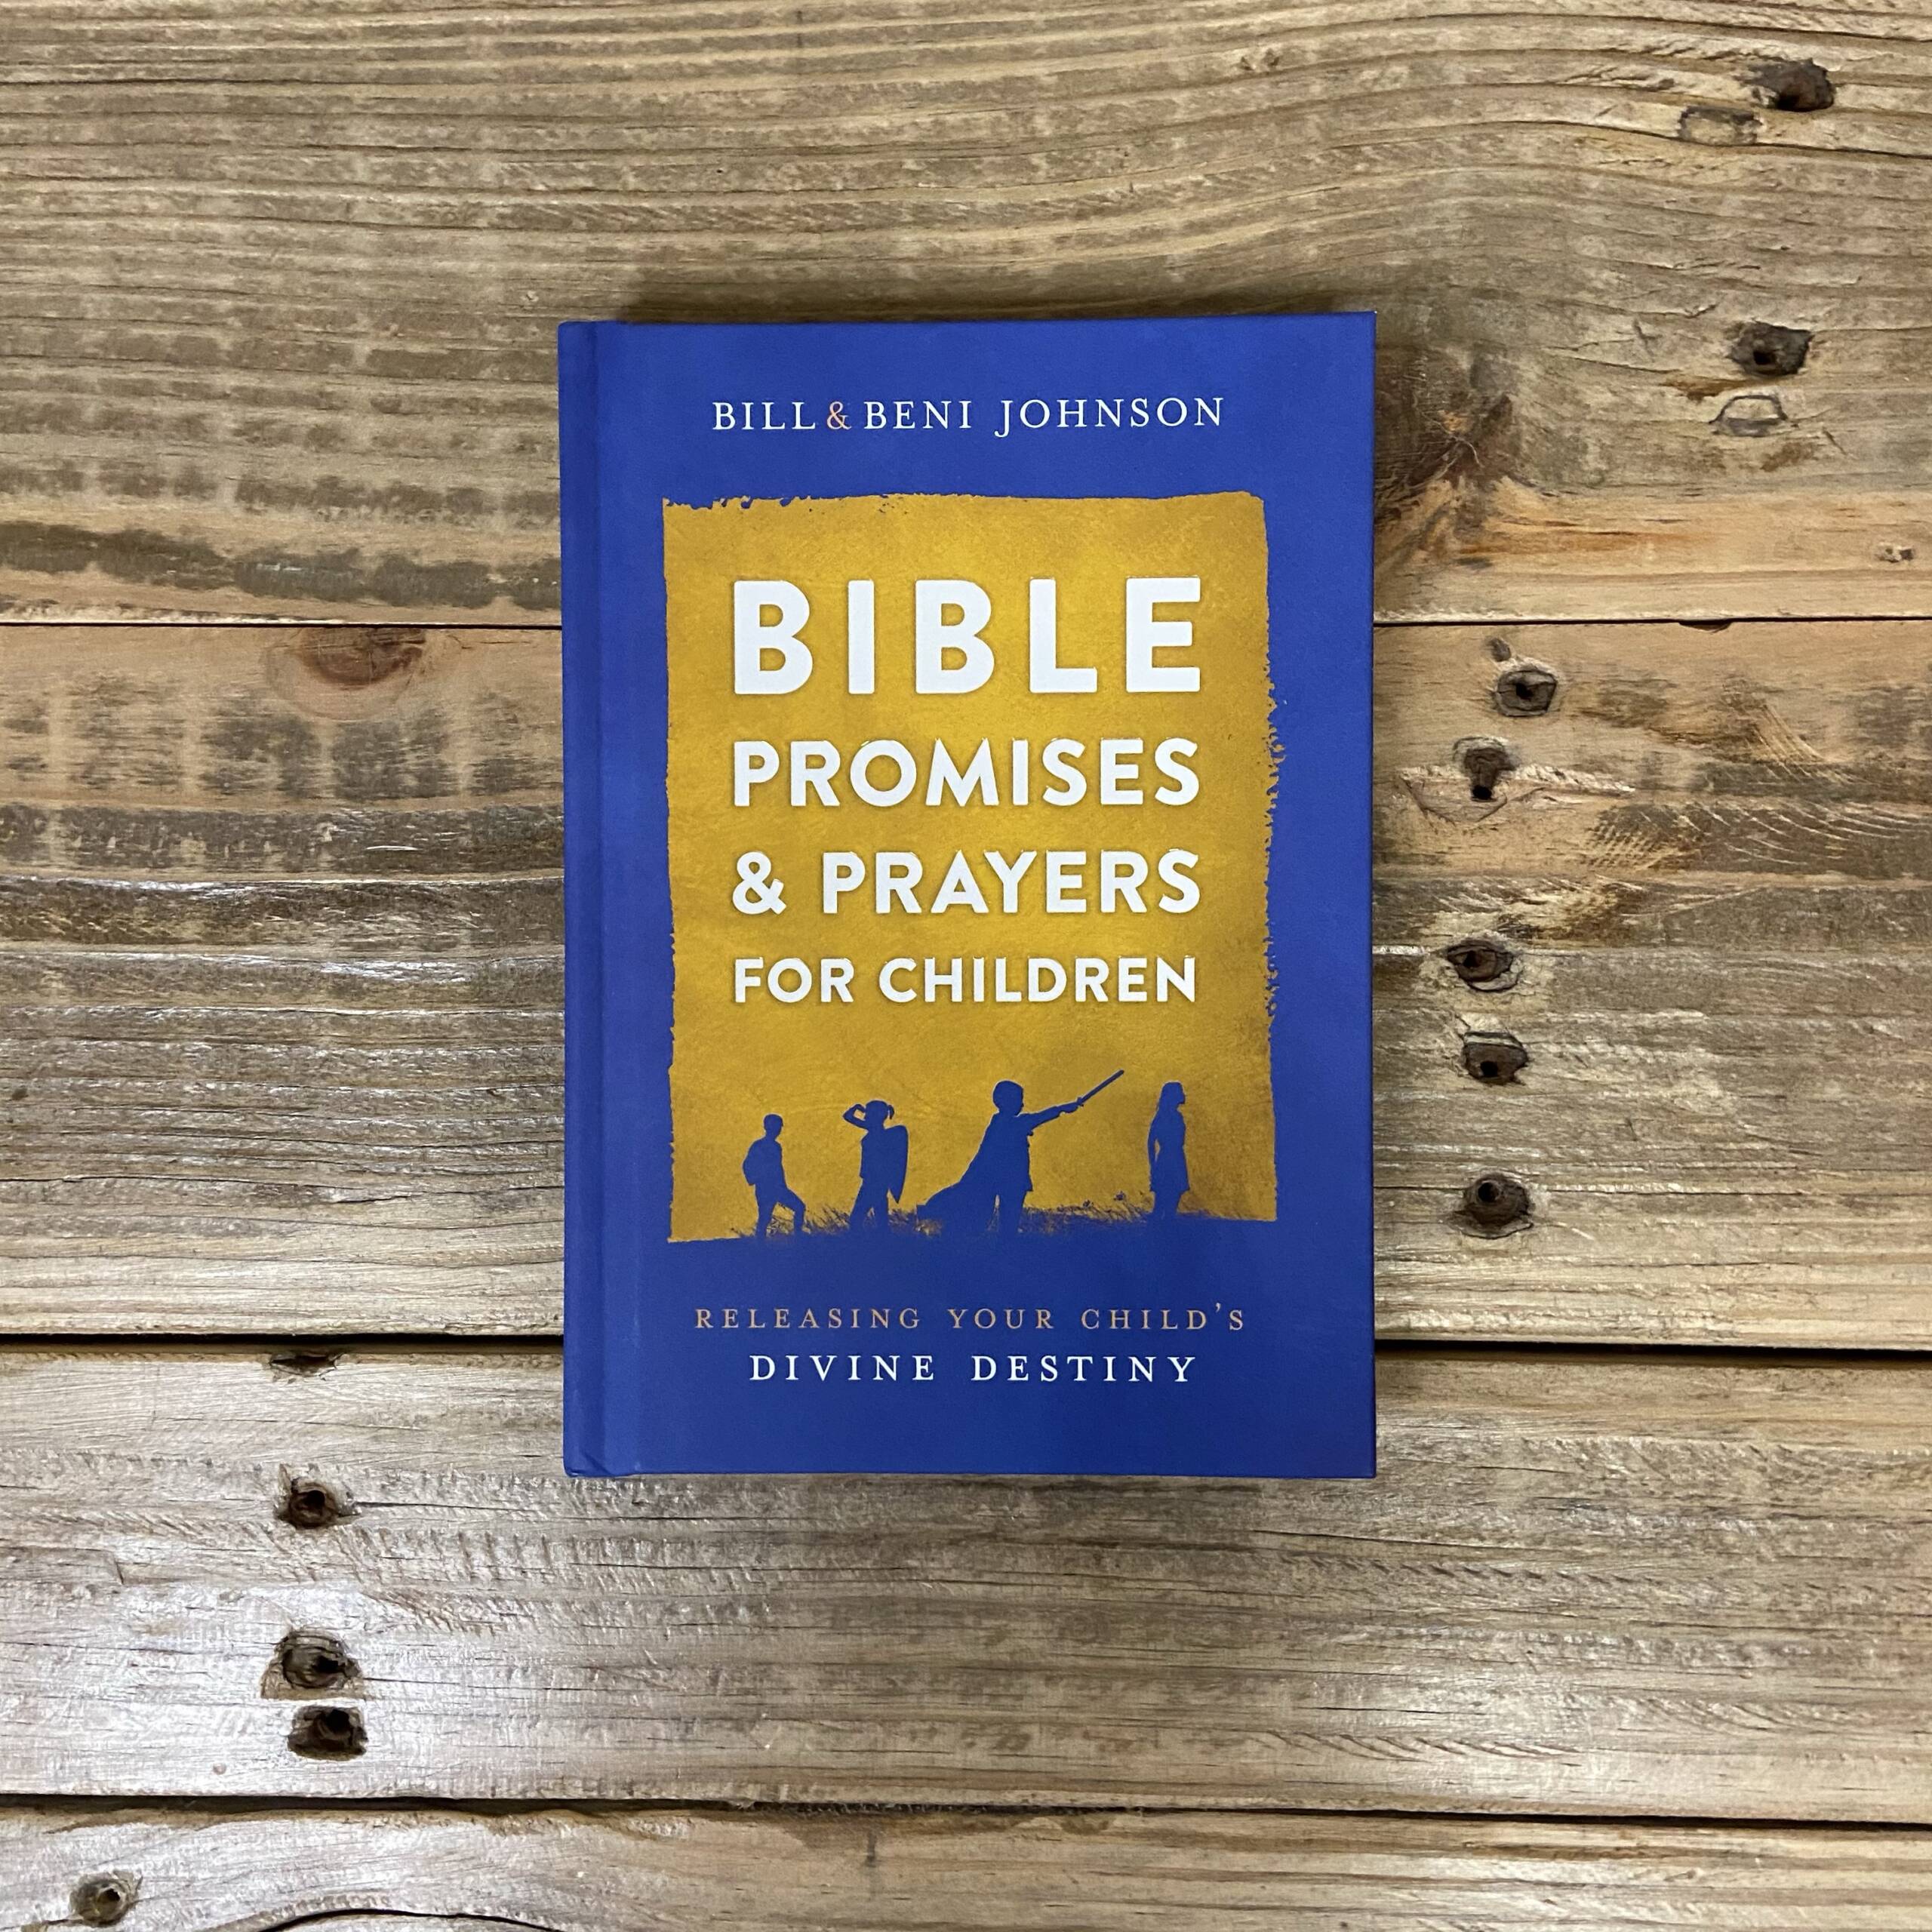 Why I love Bill Johnson’s Bible Promises and Prayers for Children